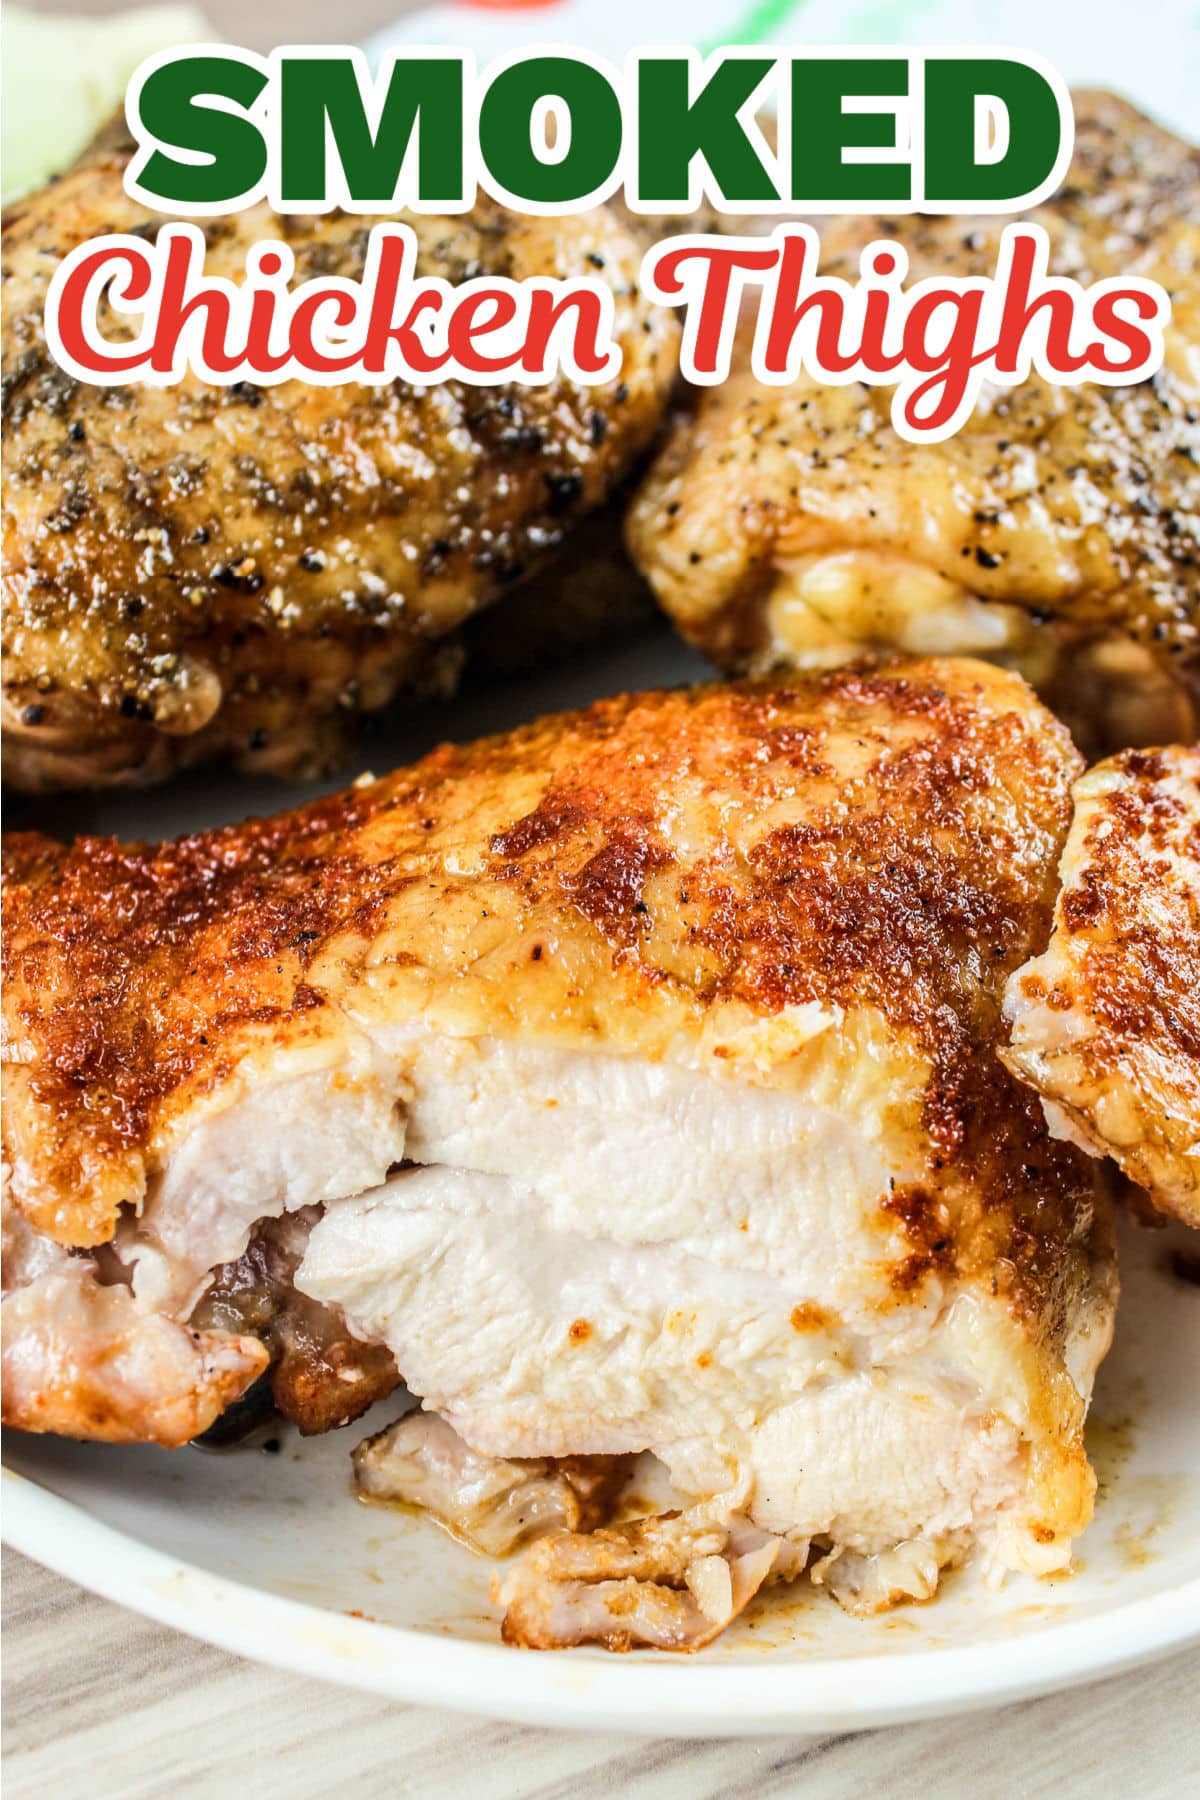 Bone-in chicken thighs are my favorite part of the chicken and smoking them on the Traeger makes them even better! Crispy skin, juicy dark meat - the best and most delicious chicken you can make!  via @foodhussy